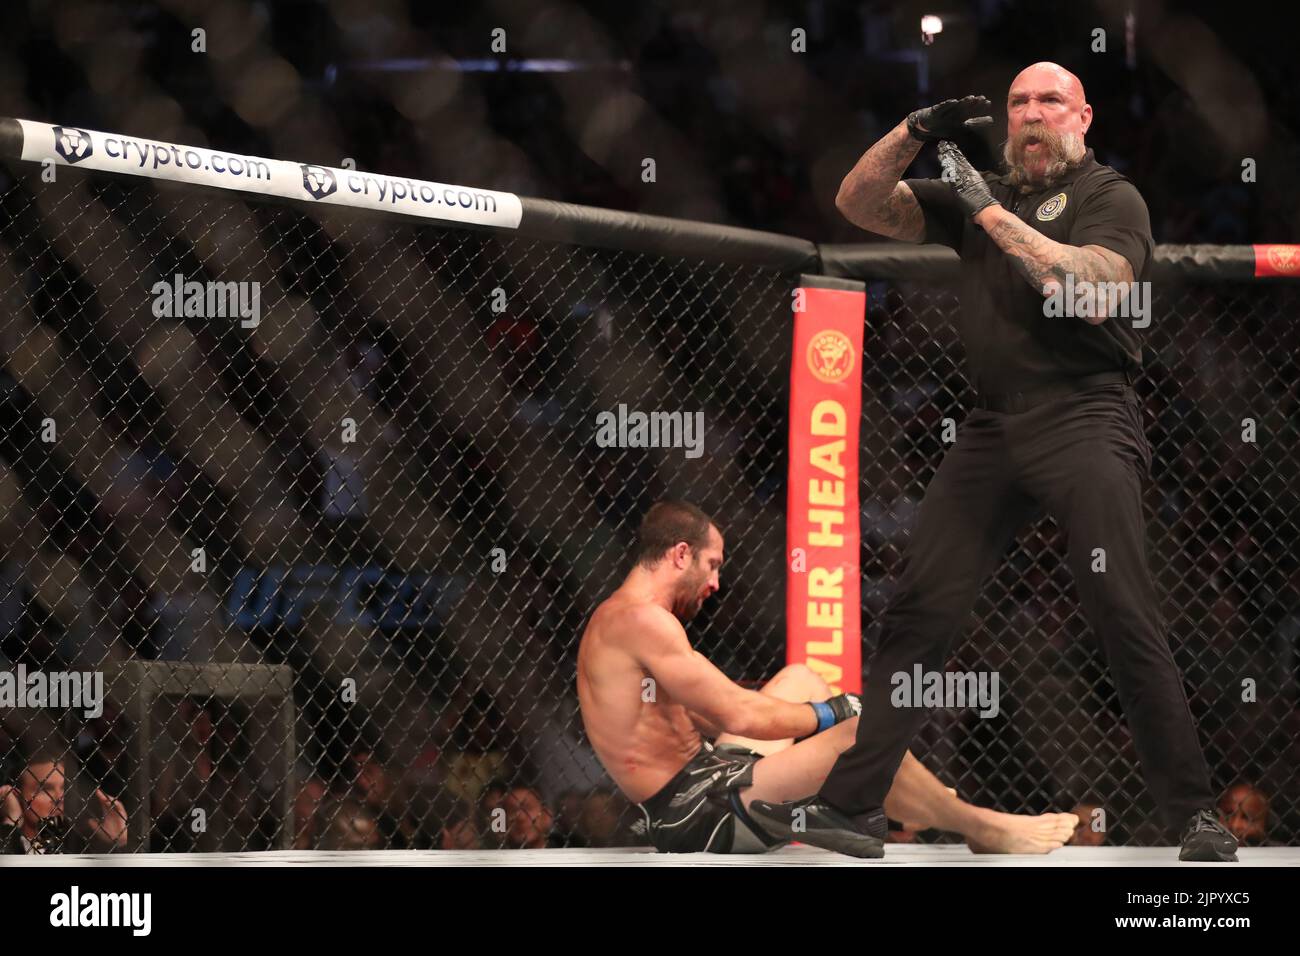 Salt Lake City, United States. 20th Aug, 2022. SALT LAKE CITY, UT - AUGUST 20: Referee Mike Beltran during the Paulo Costa and Luke Rockhold bout at the UFC 278 at the Vivint Arena on August 20, 2022 in Salt Lake City, Utah, United States. (Photo by Alejandro Salazar/PxImages) Credit: Px Images/Alamy Live News Stock Photo